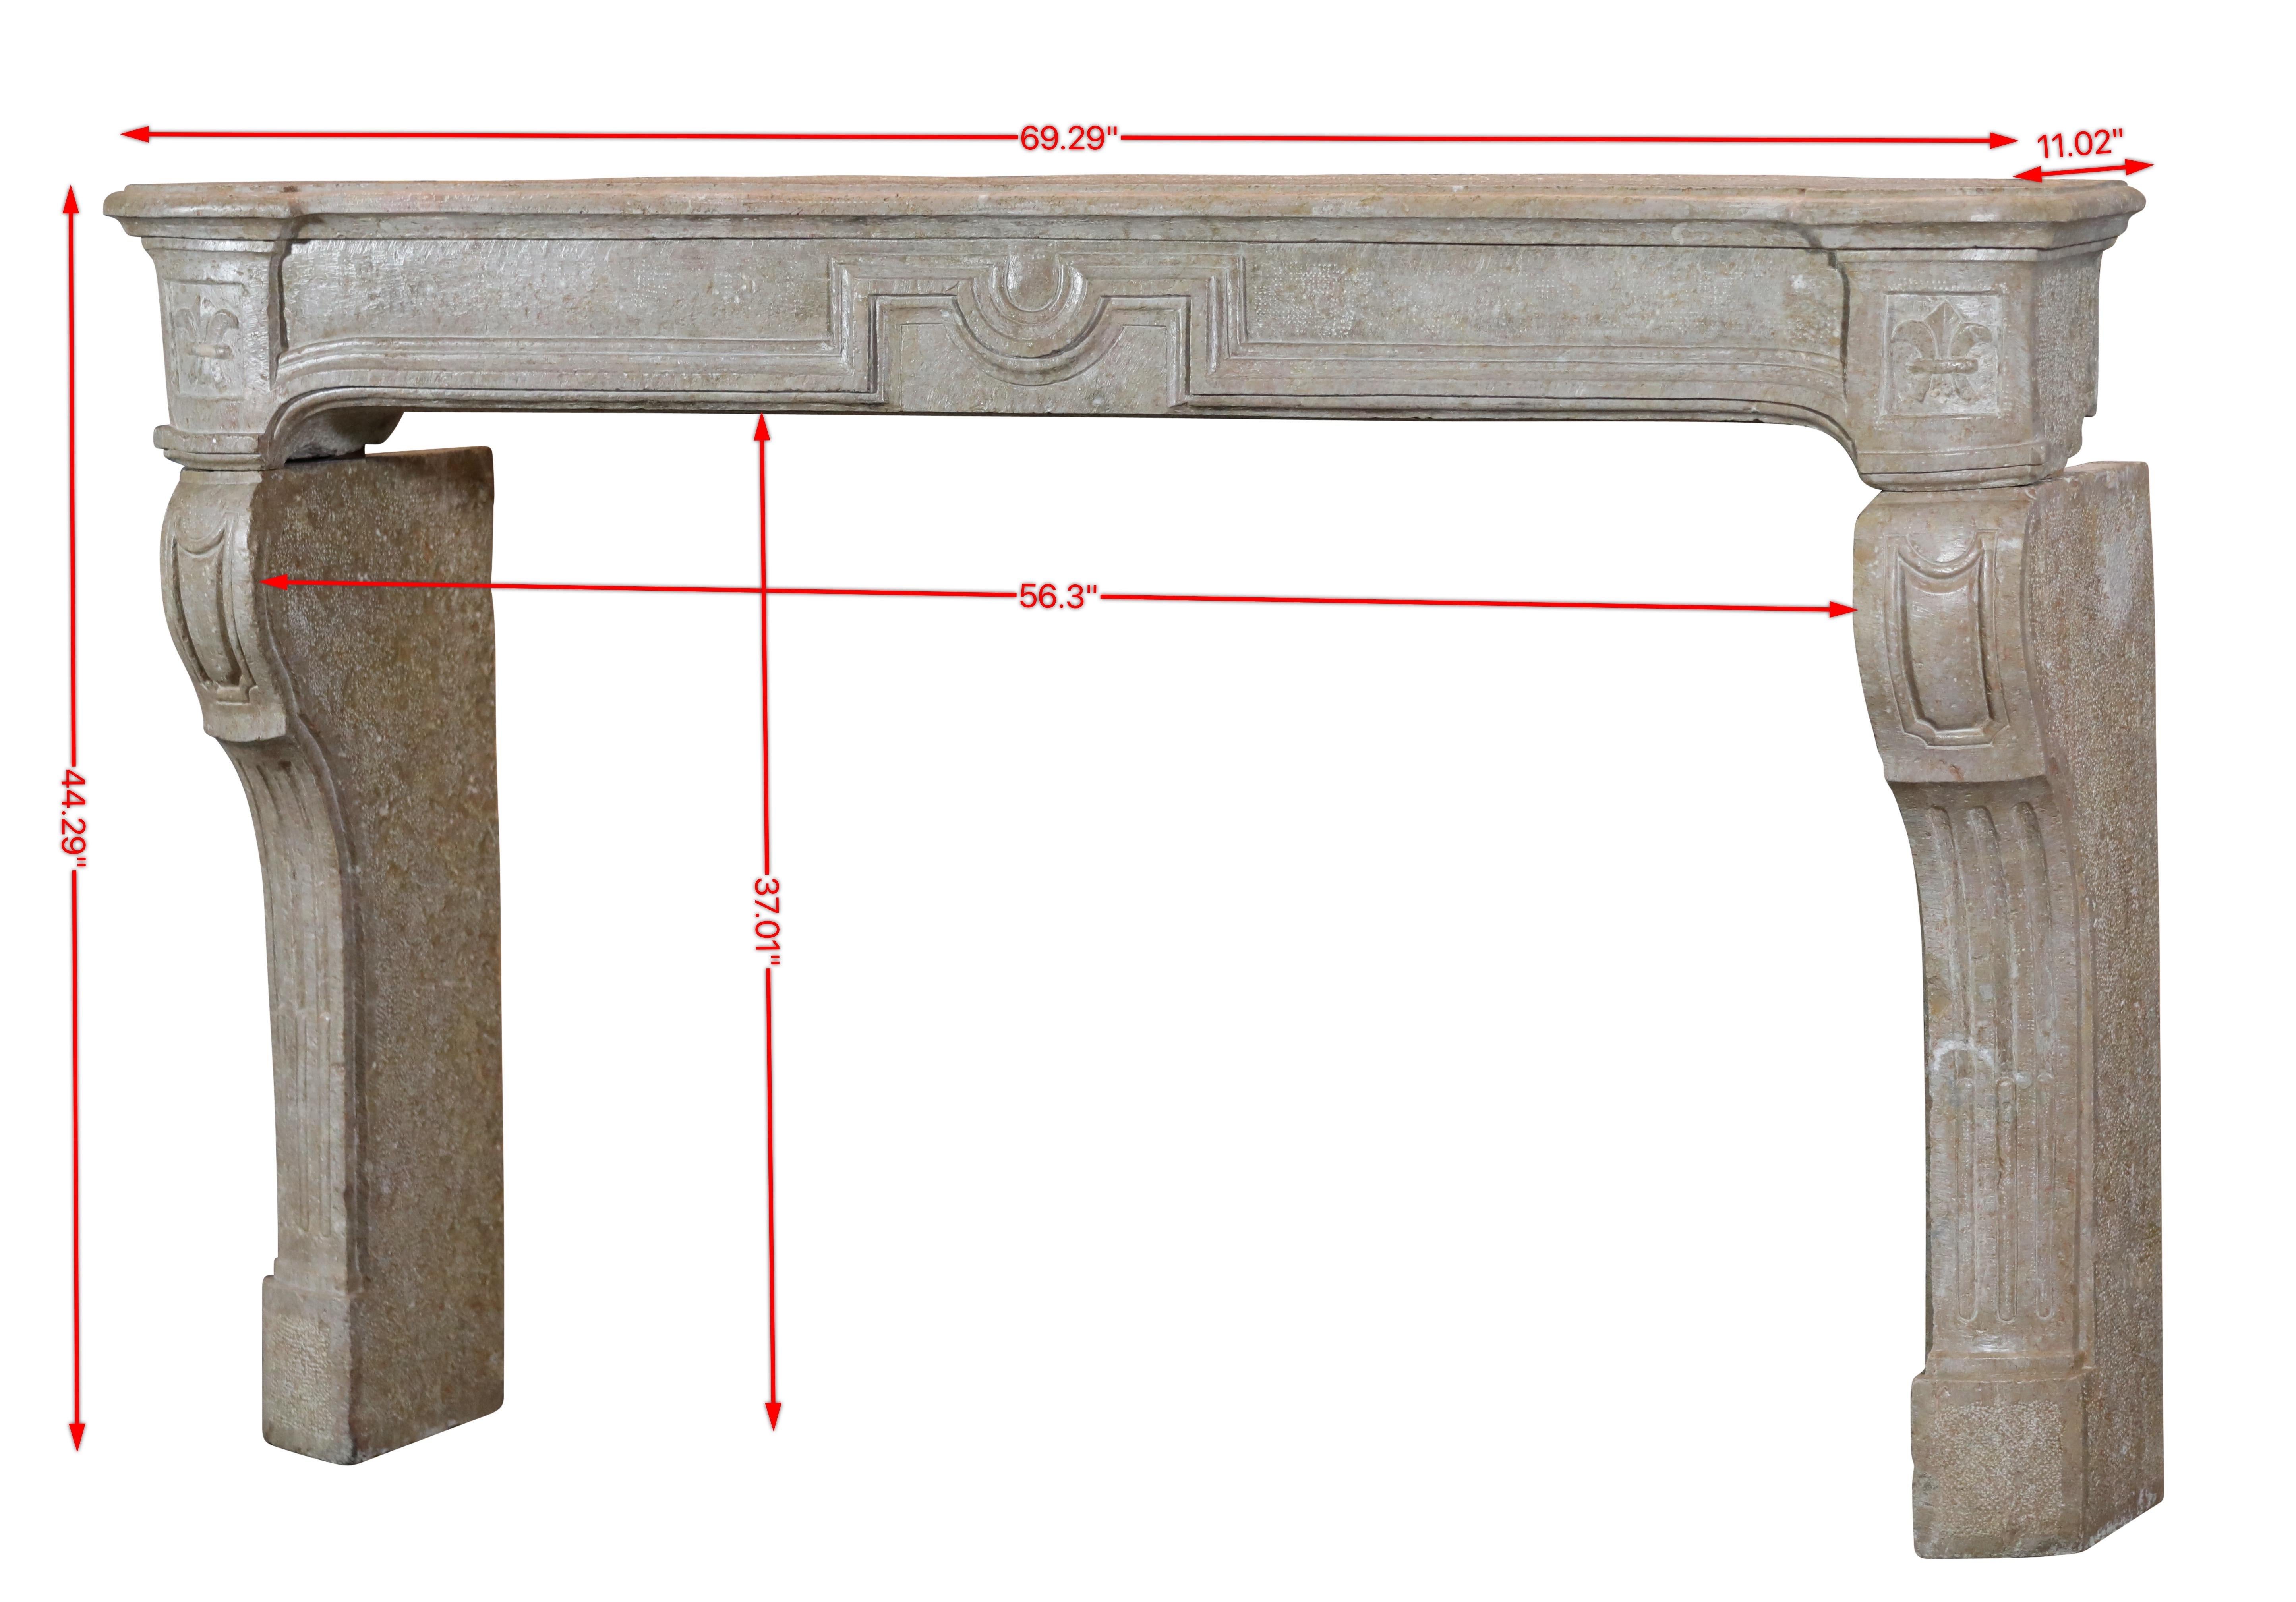 Unique timeless French limestone fireplace surround with beautiful Fleur de Lys details on the fronton. 
Measurements:
176 cm Exterior Width 69,29 Inch
112,5 cm Exterior Height 44,29 Inch
143 cm Interior Width 56,30 Inch
94 cm Interior Height 37,01